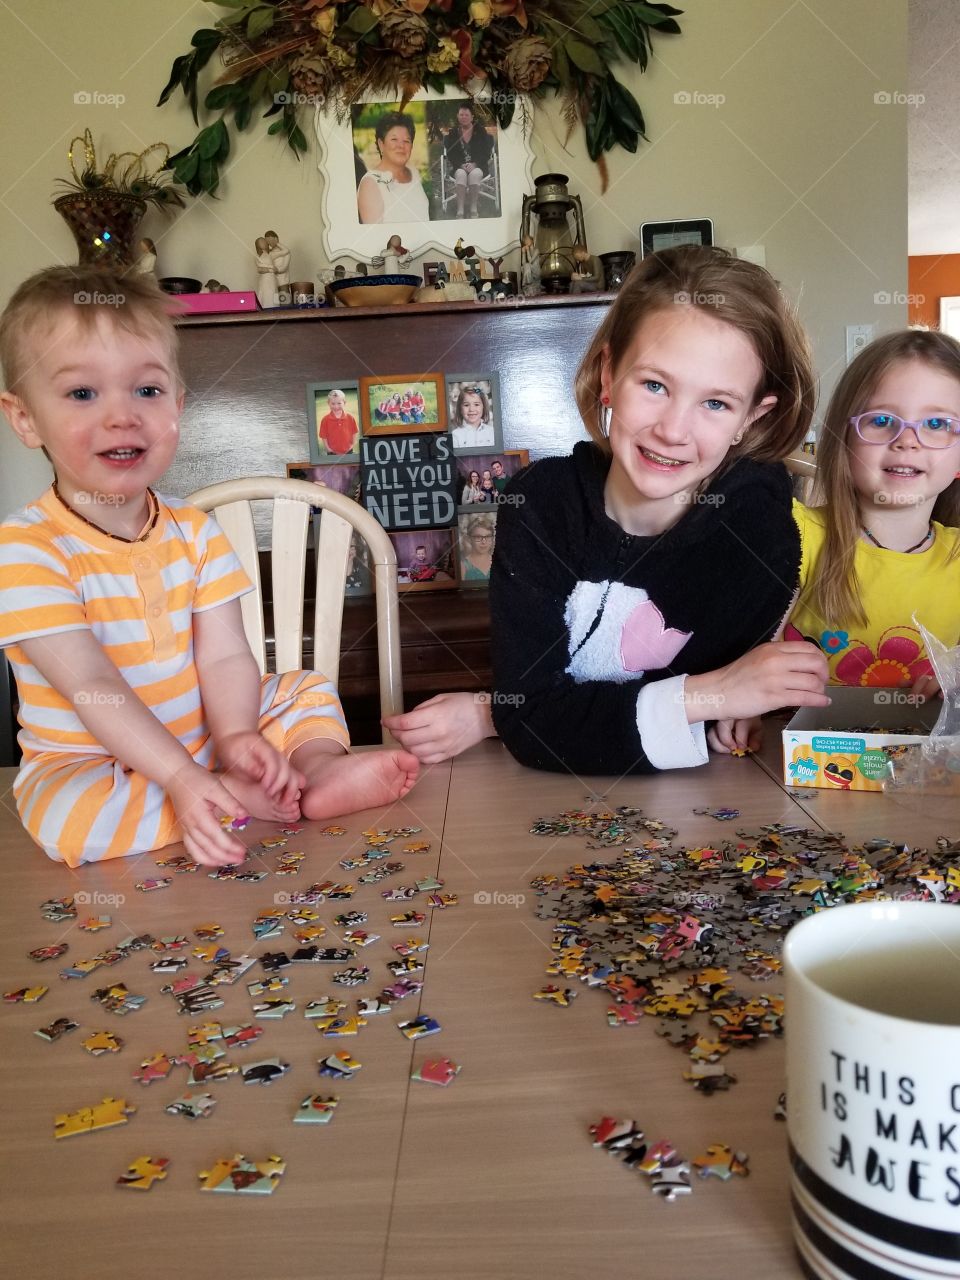 Beautiful Sunday morning family time with the kids doing a puzzle. Everyone is enjoying themselves in their pjs.